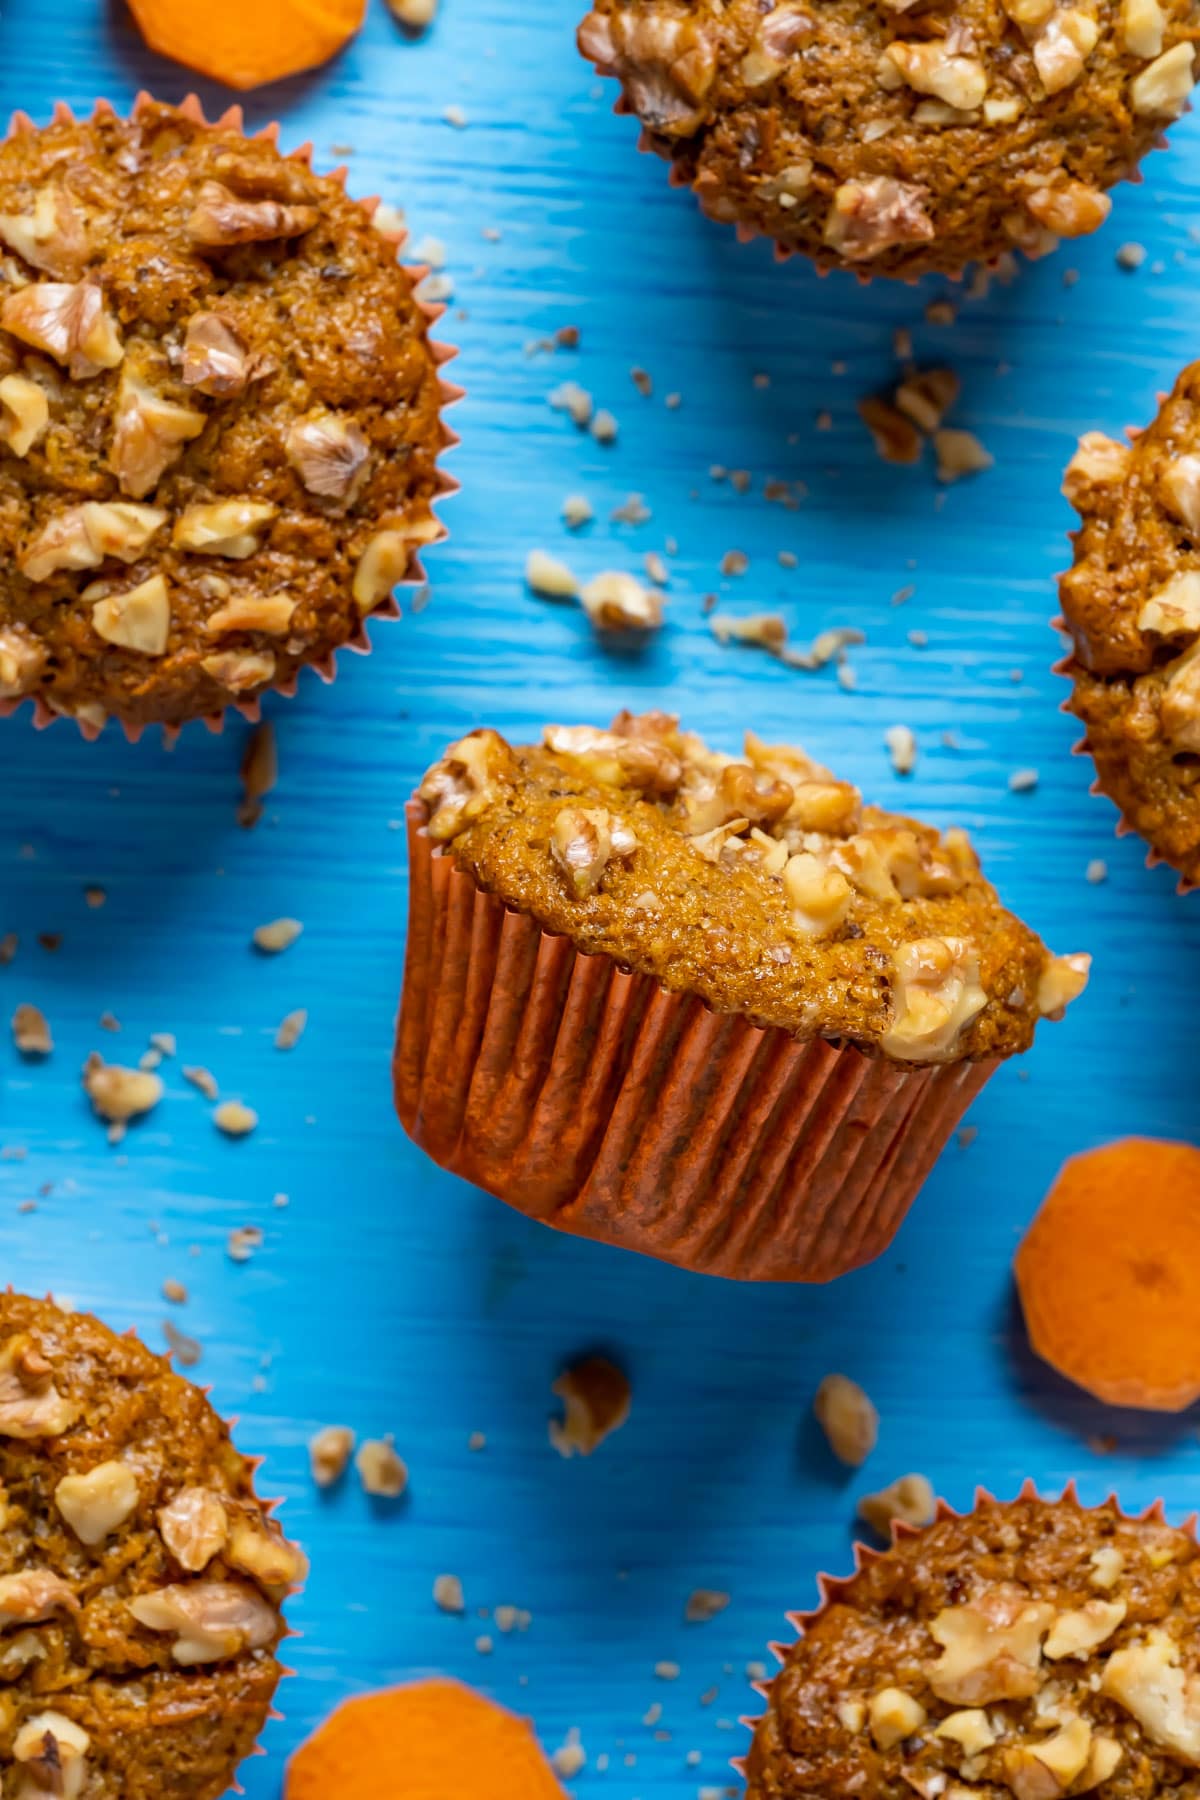 Vegan carrot muffins topped with chopped walnuts.